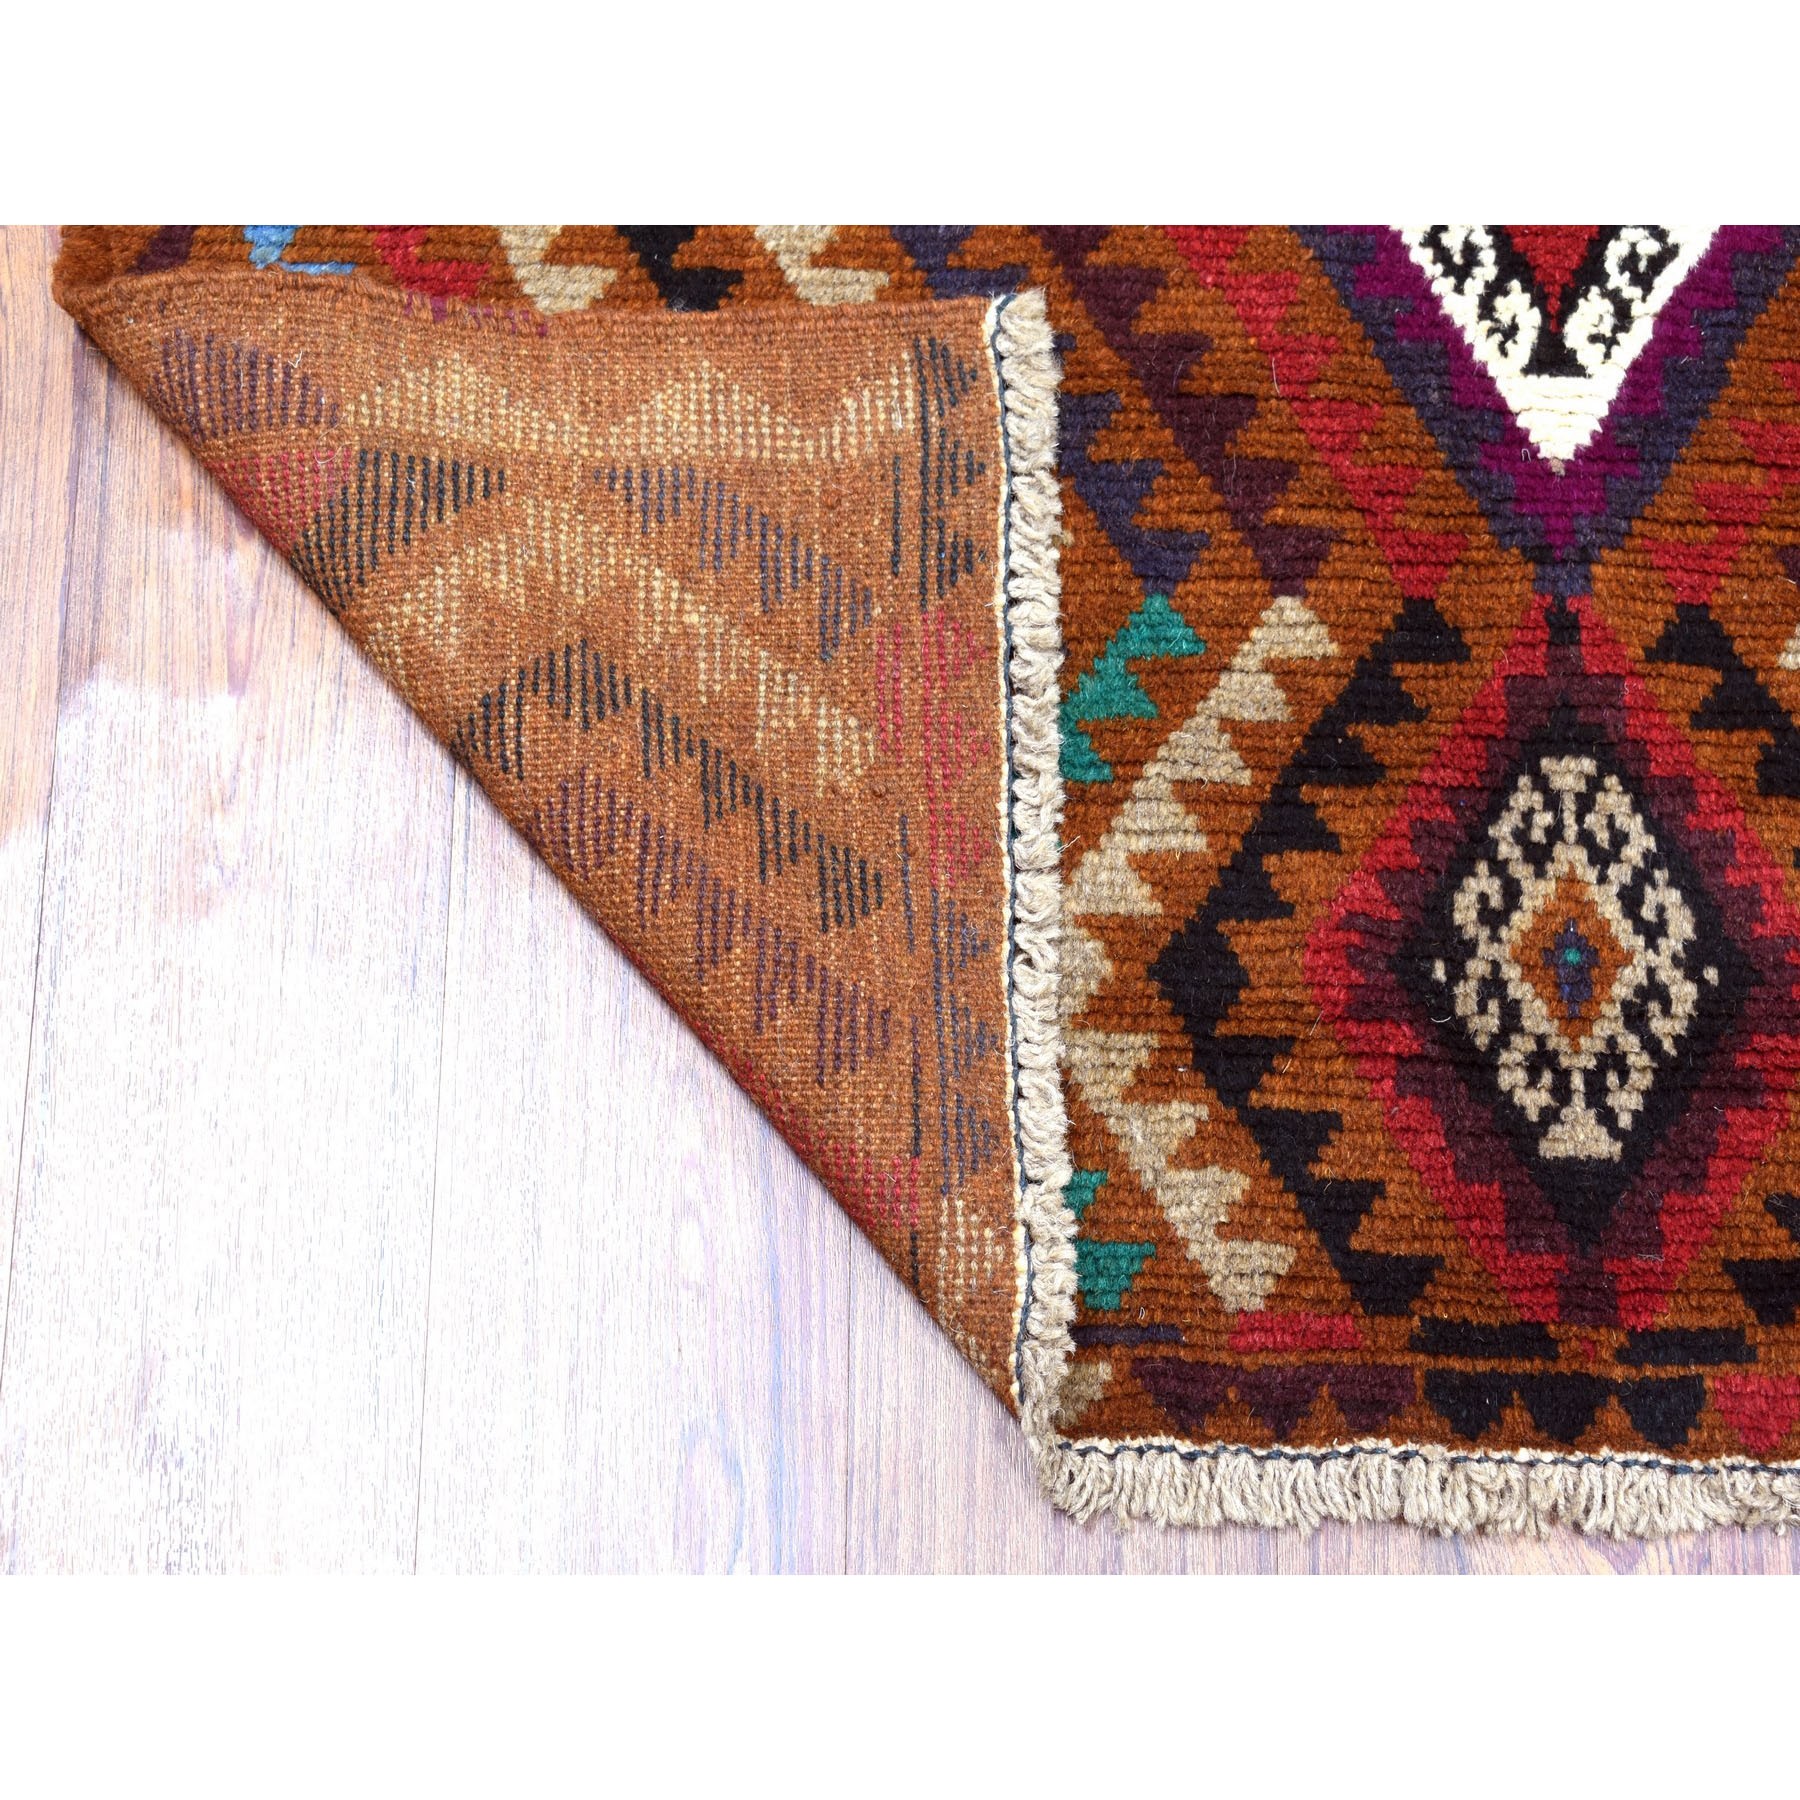 3'7"x6'1" Brown Natural Dyes Geometric Design Colorful Afghan Baluch Hand Woven 100% Wool Oriental Rug 